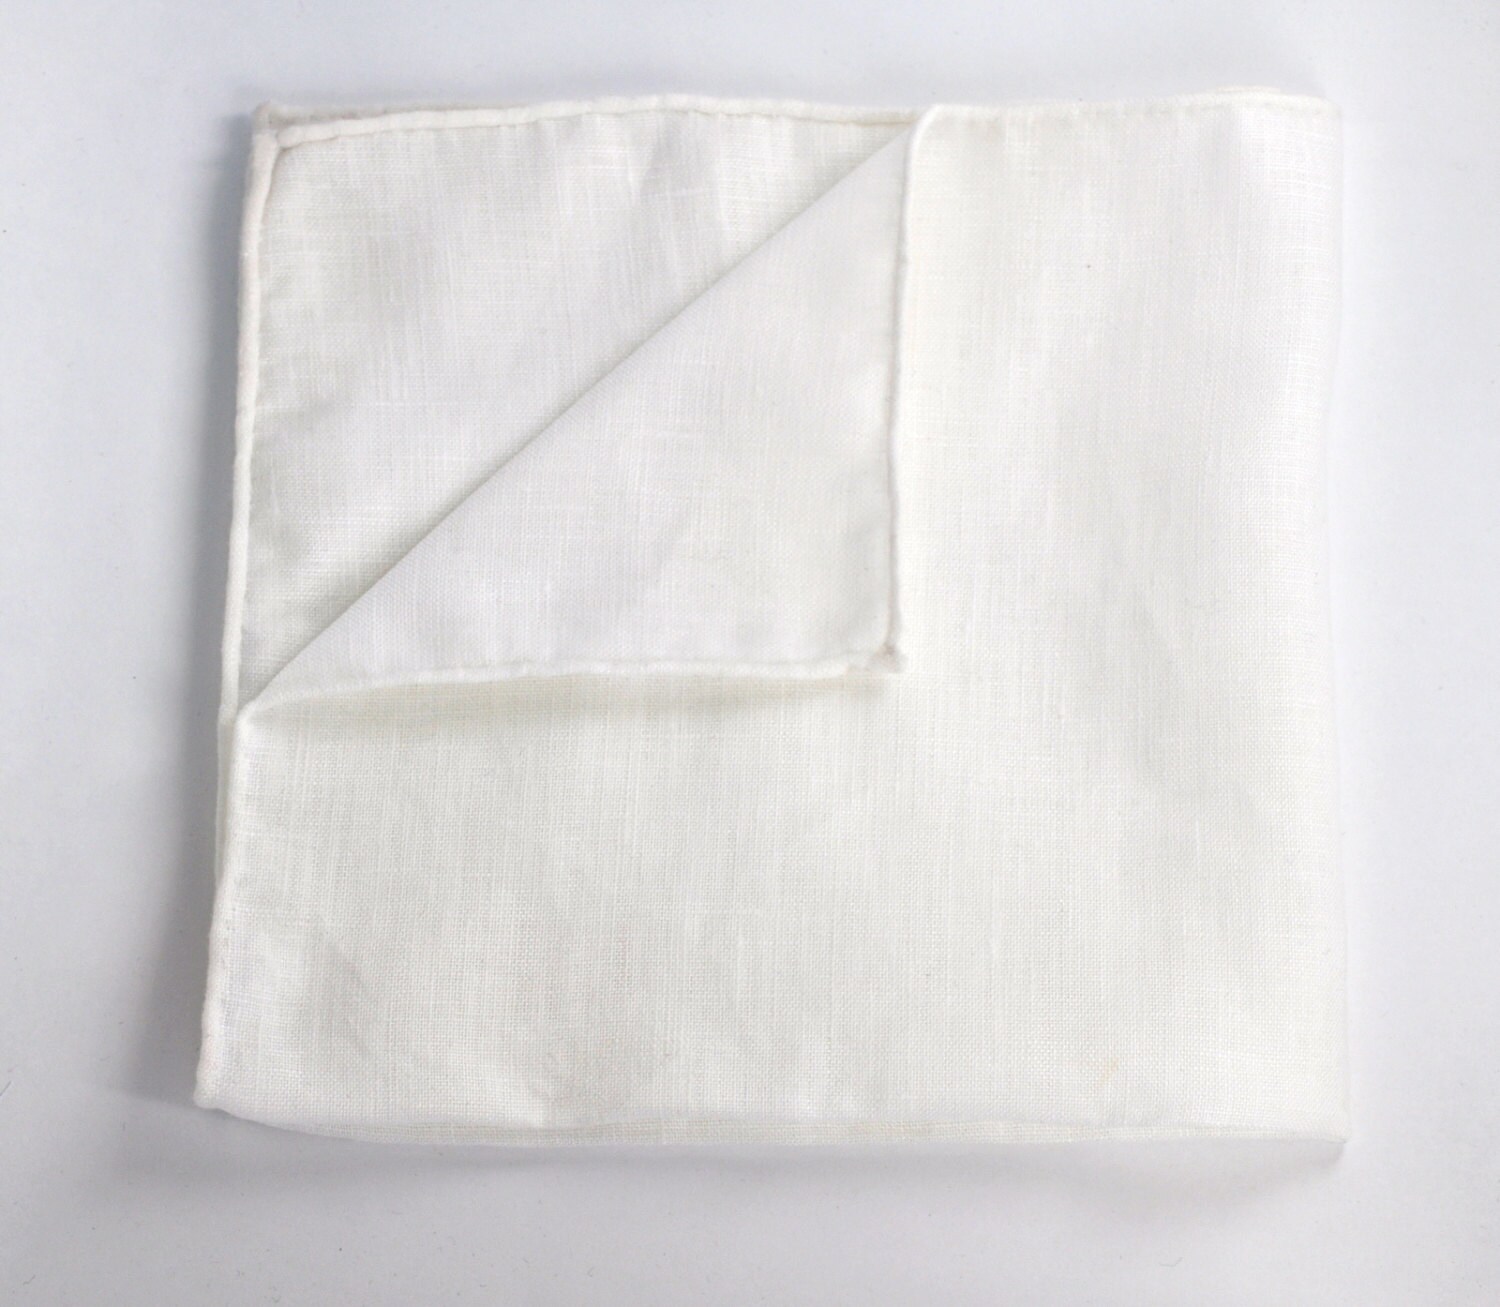 BEST SELLER Crisp white linen pocket square with by 10DollarGent